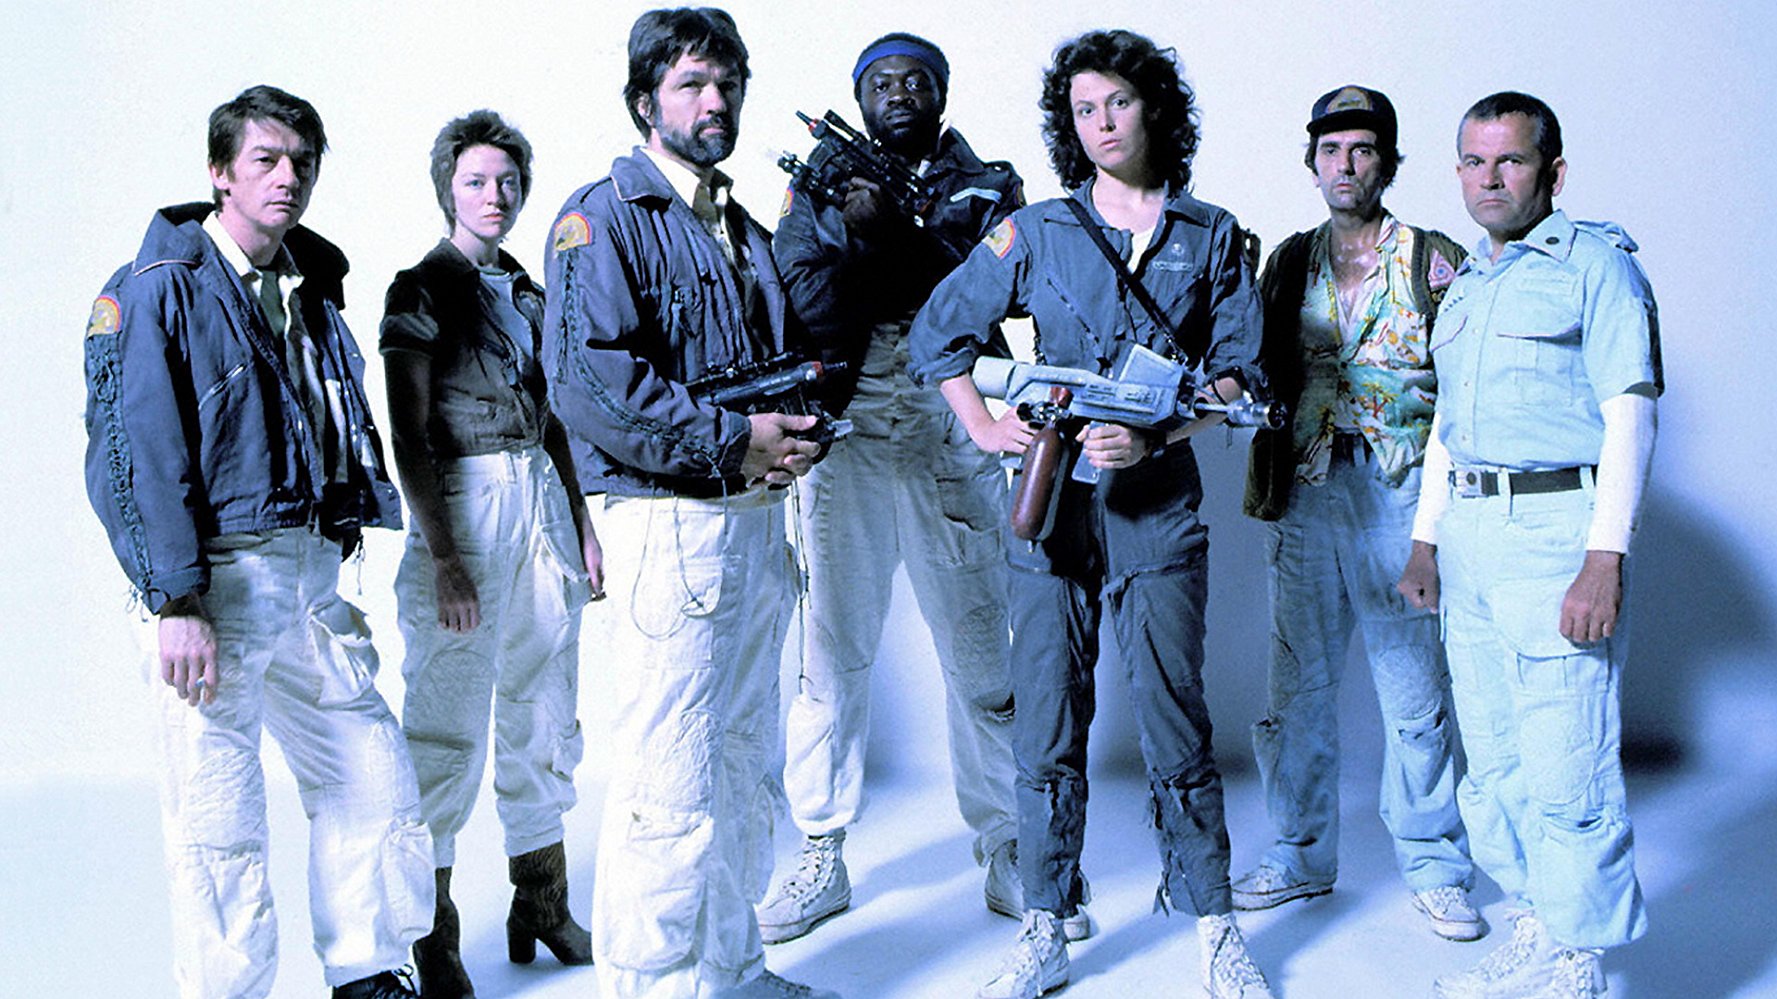 Tom Skerritt with other actors from the movie Alien